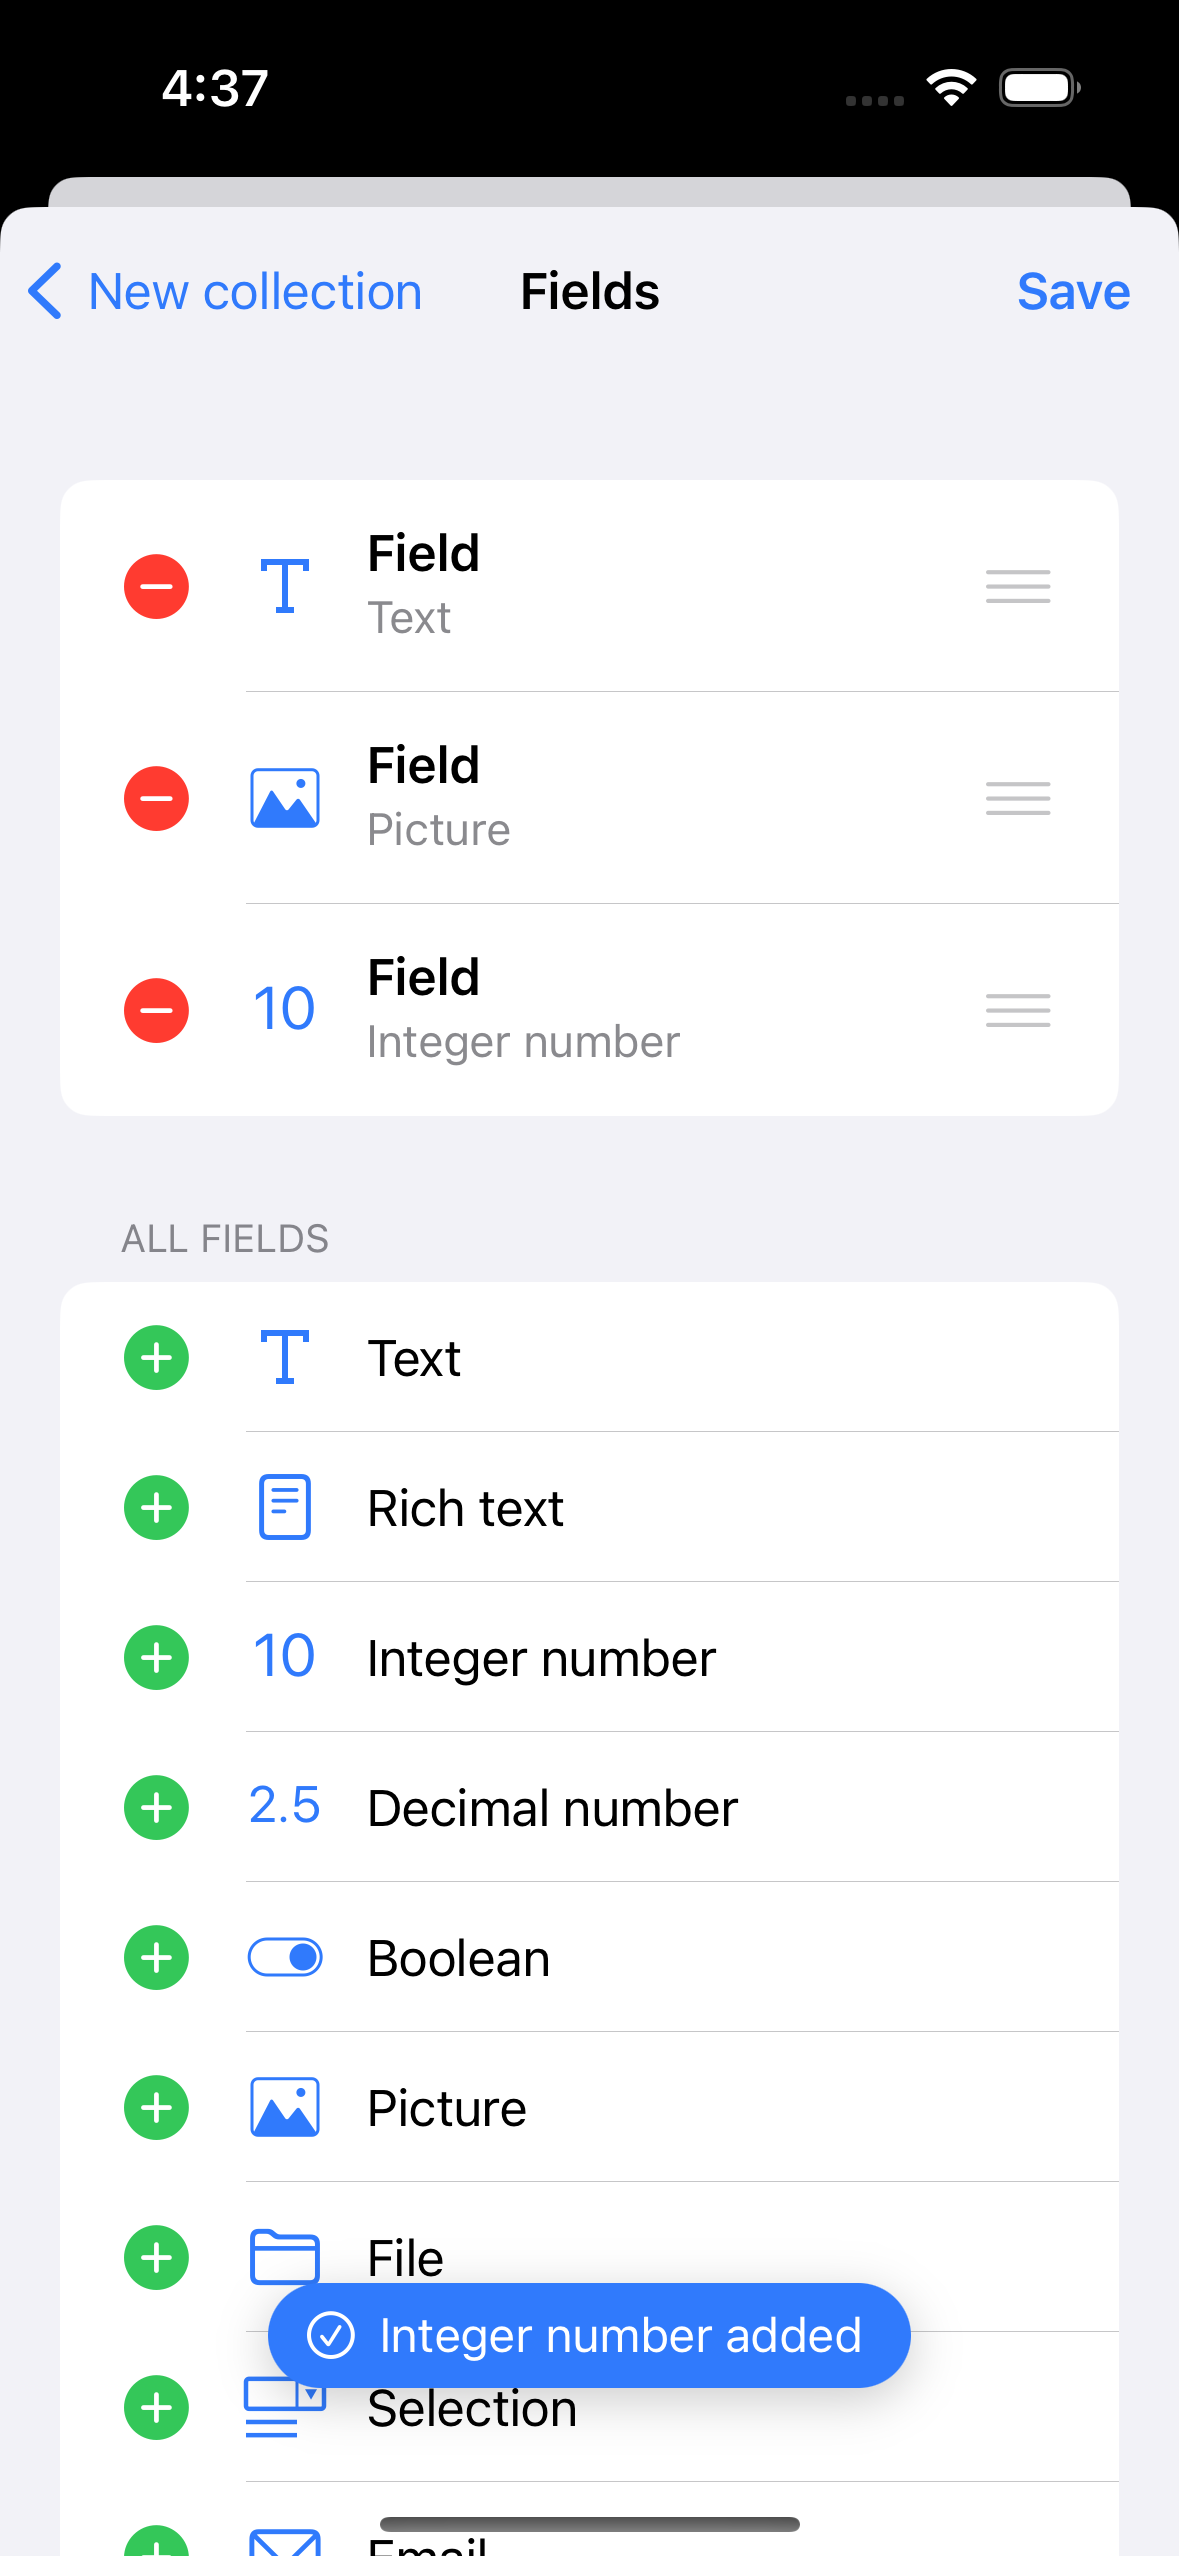 New collection fields